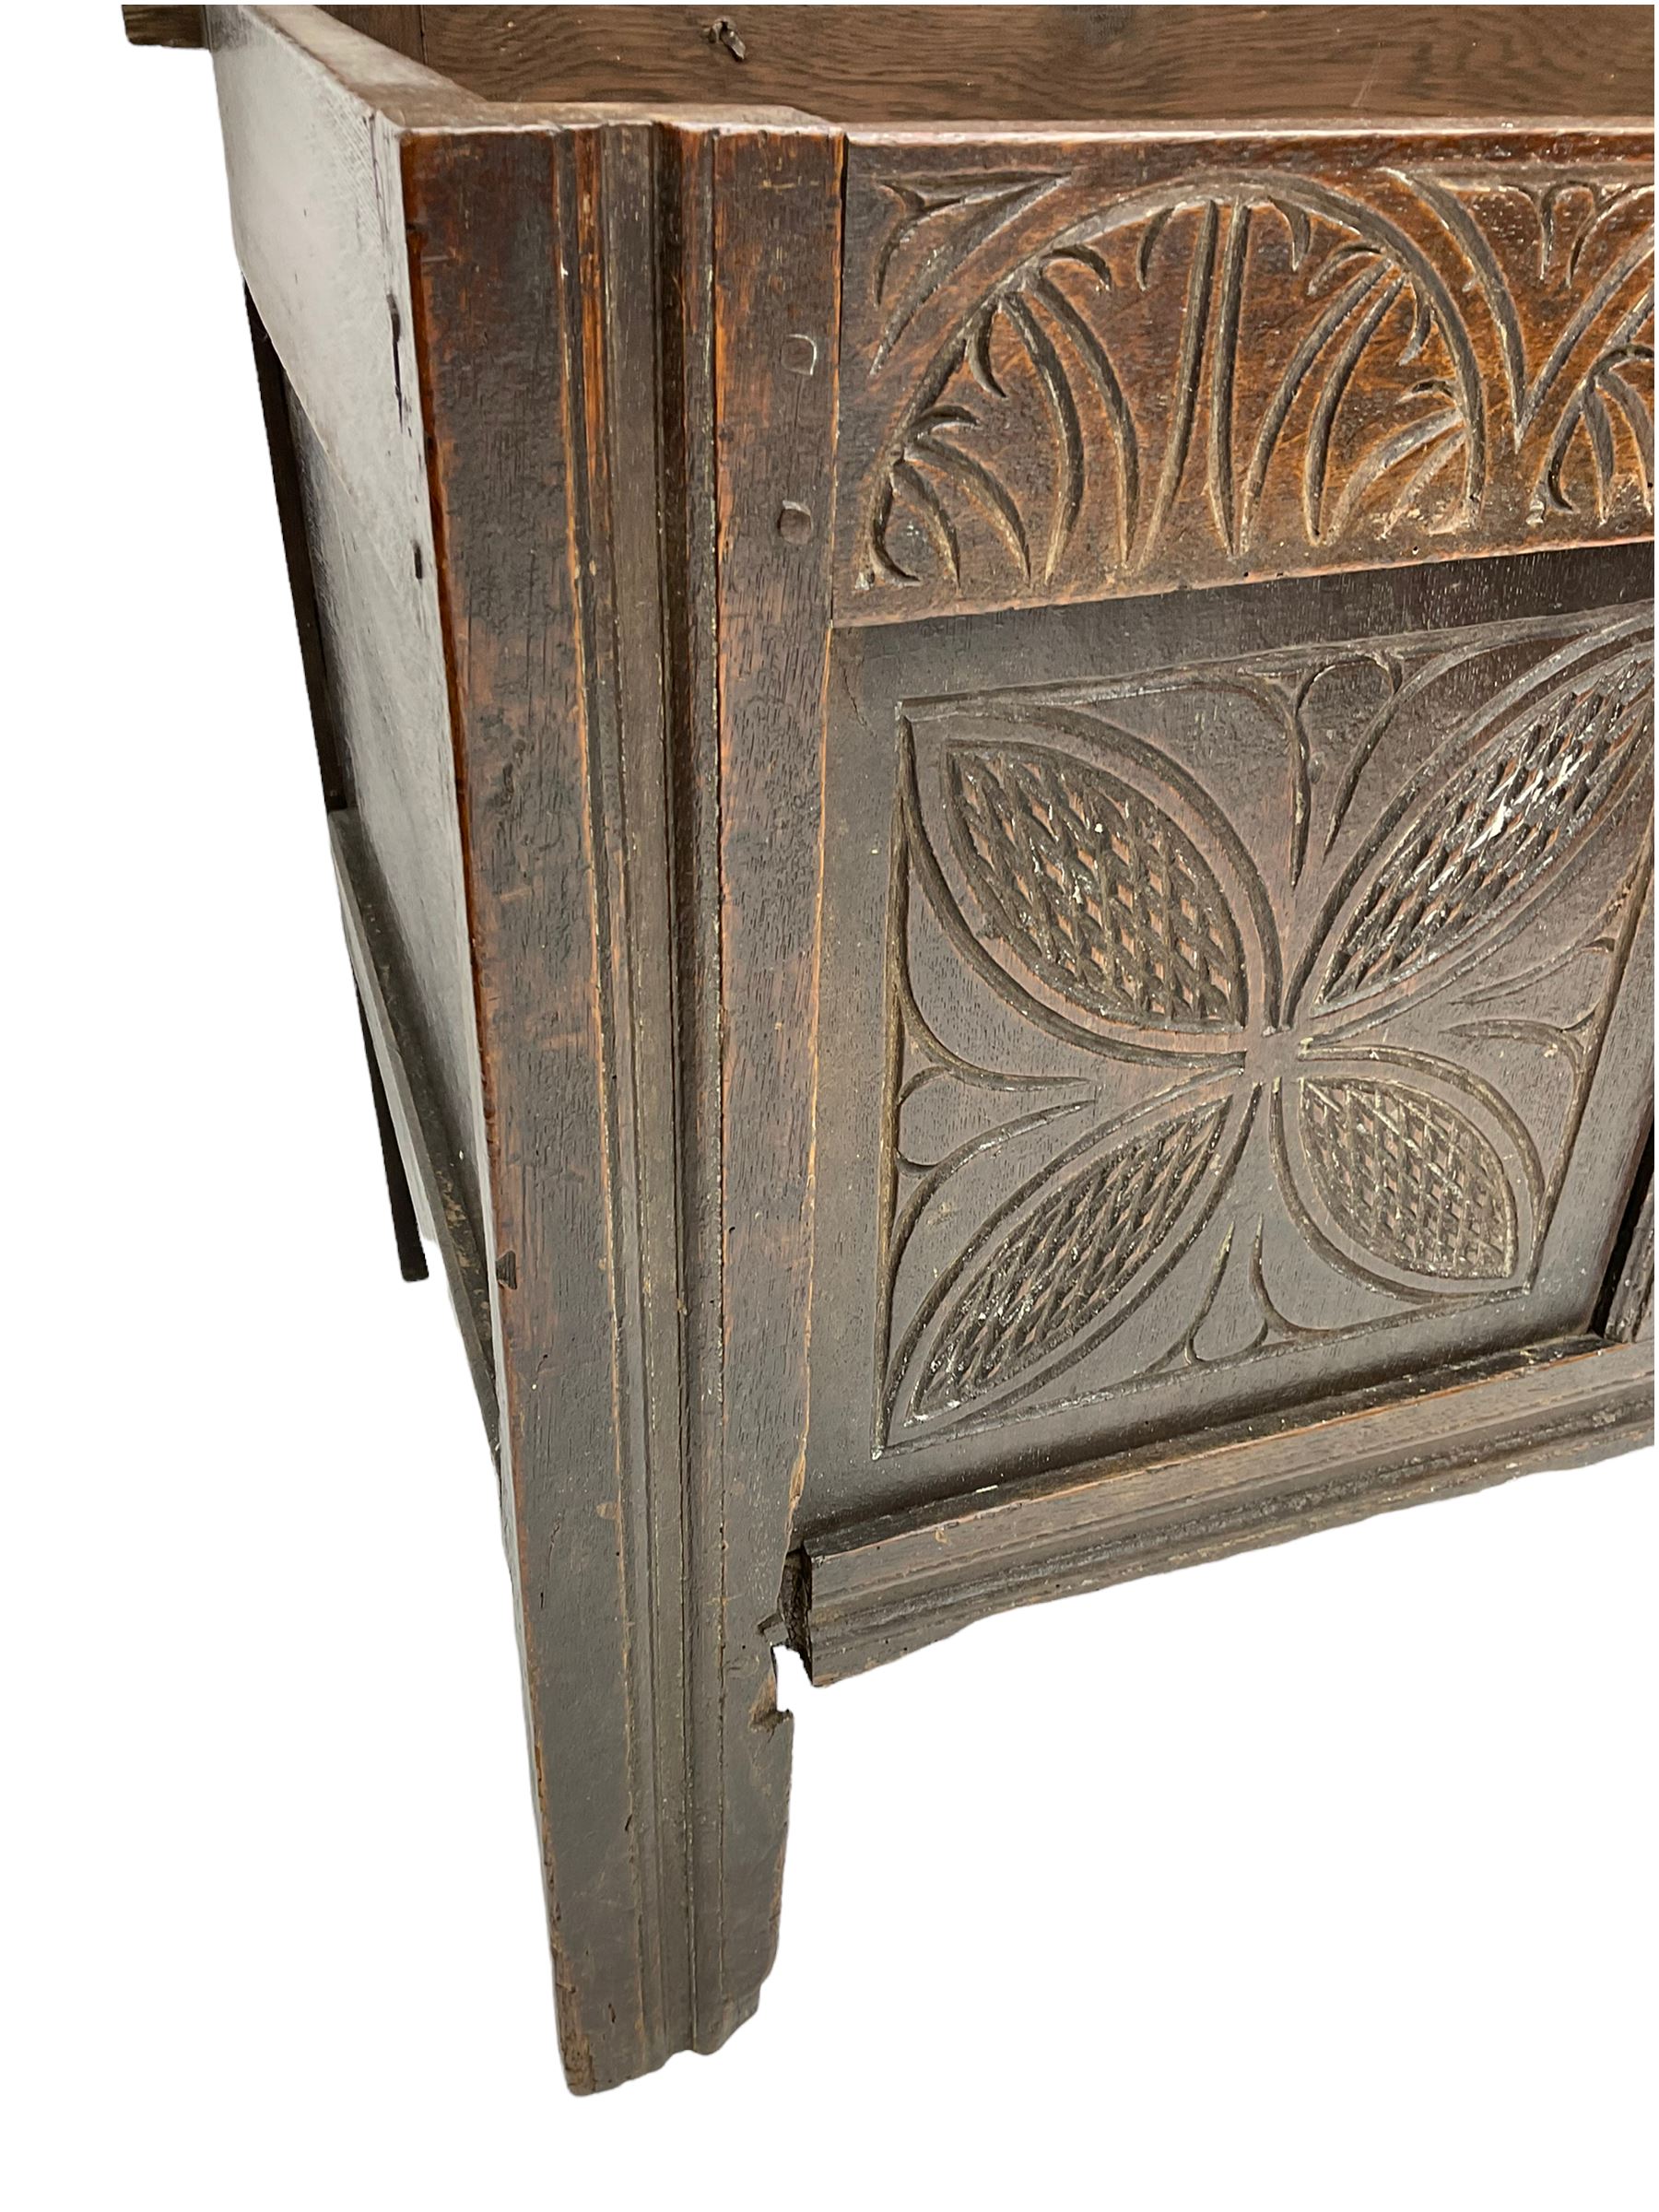 18th century carved oak blanket box - Image 3 of 5